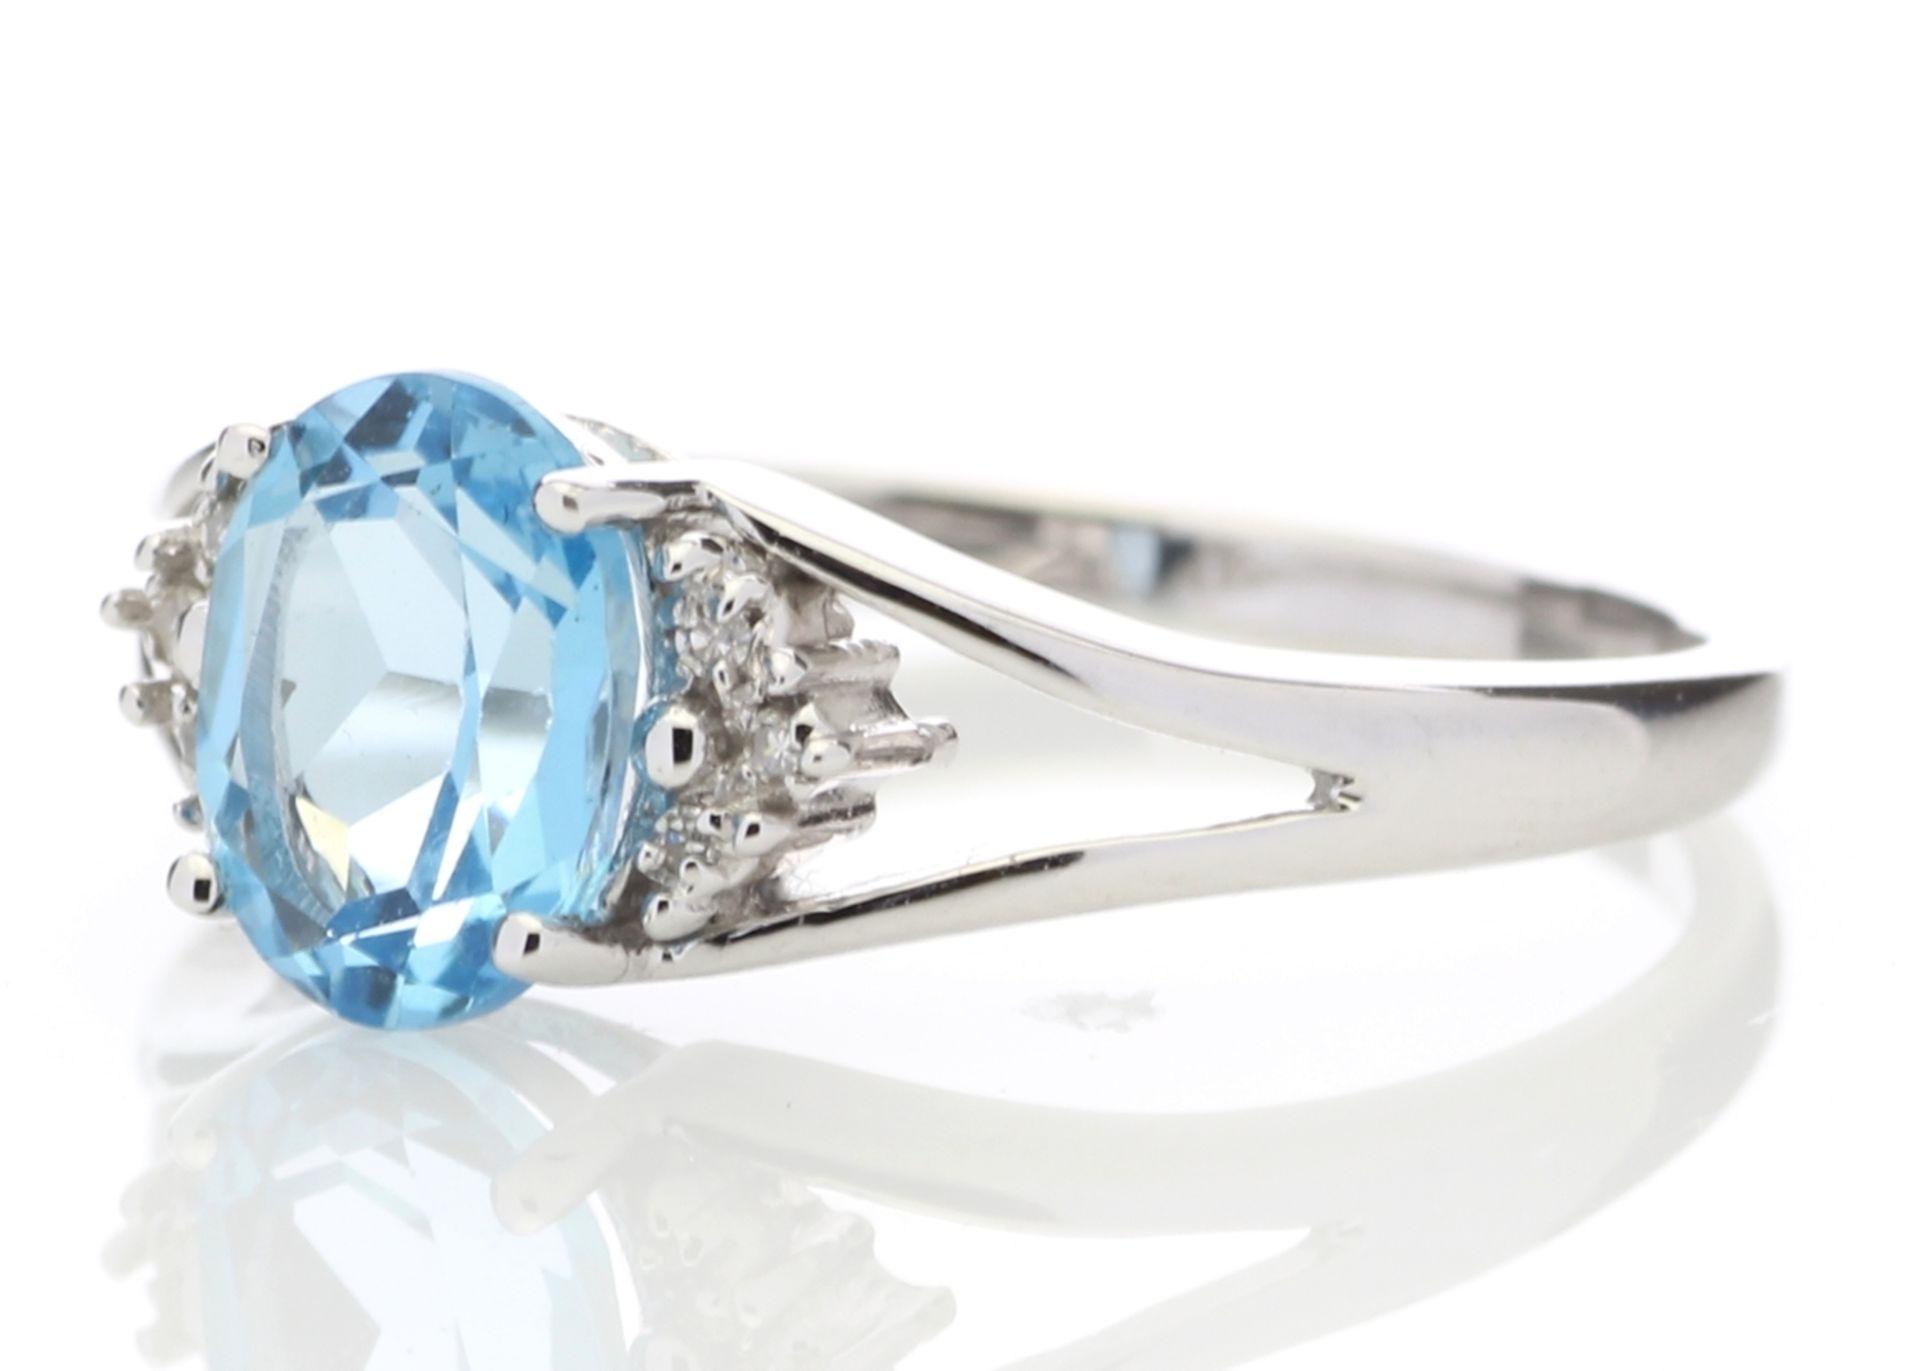 9ct White Gold Diamond And Blue Topaz Ring 0.02 Carats - Image 2 of 6